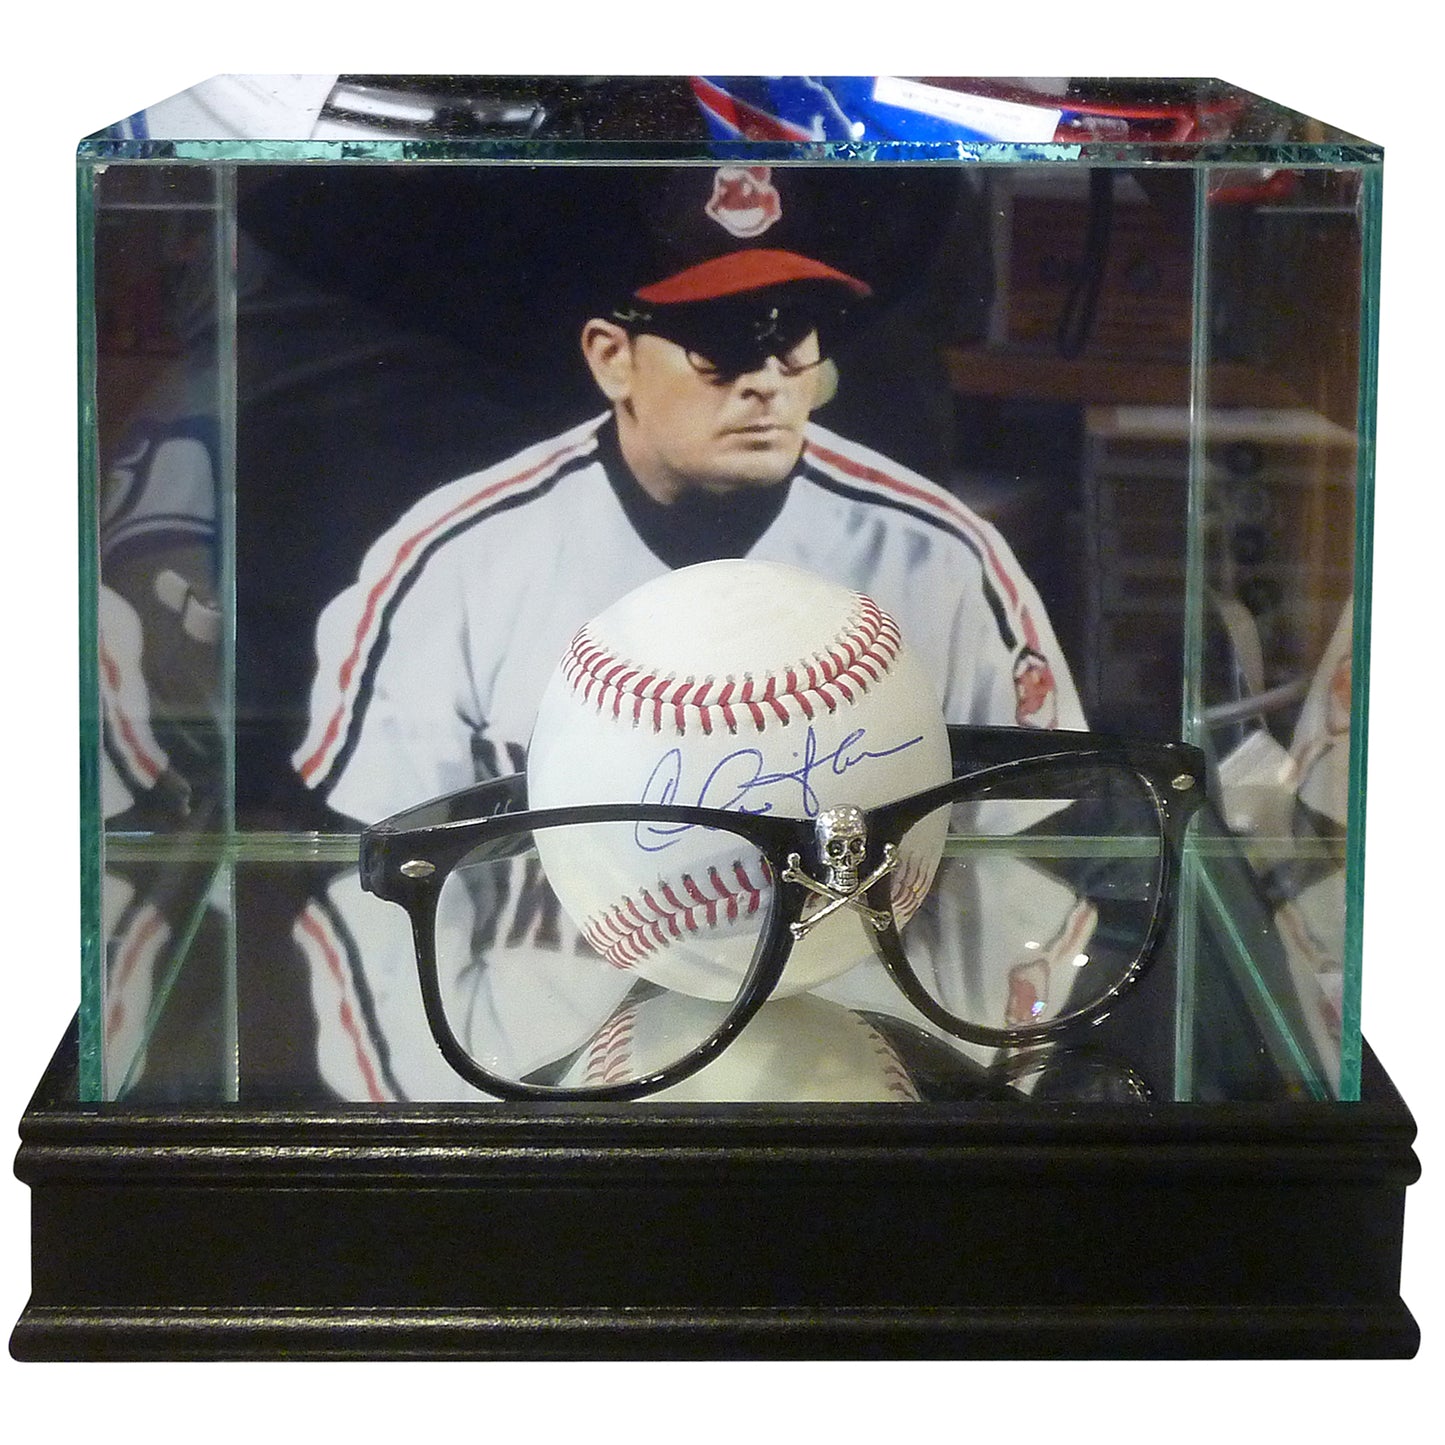 Charlie Sheen Autographed MLB Baseball w/ “Wild Thing” inscription in Deluxe Glass Display case with Novelty Glasses